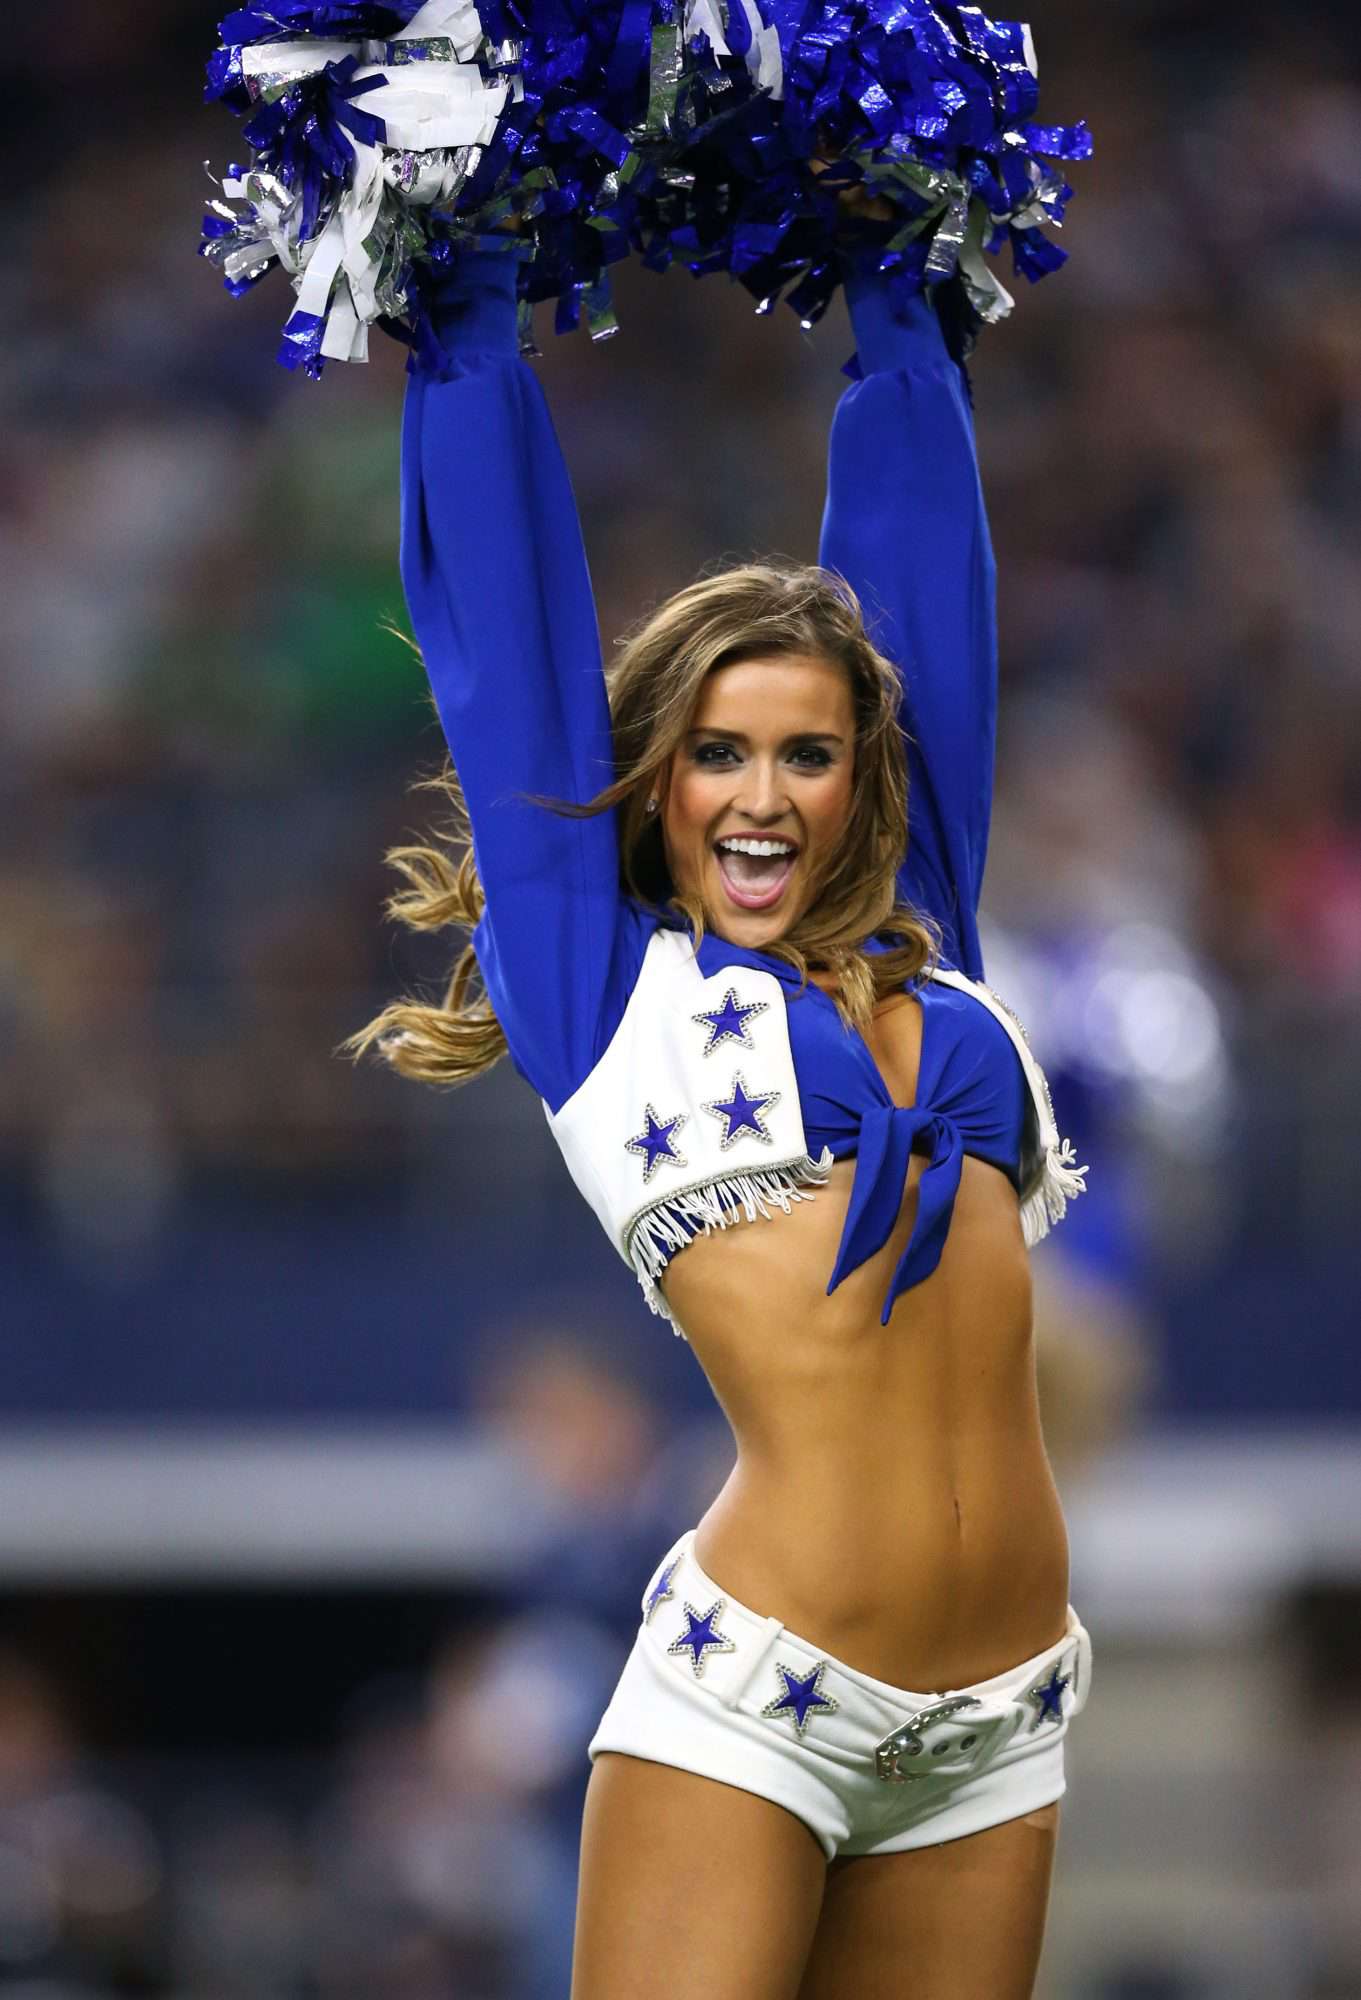 How much does a dallas cowboys cheerleader make a year Dallas Cowboys Let S Get Real About Your Outdated Cheerleaders And The Giant Video Board That Exploits Them